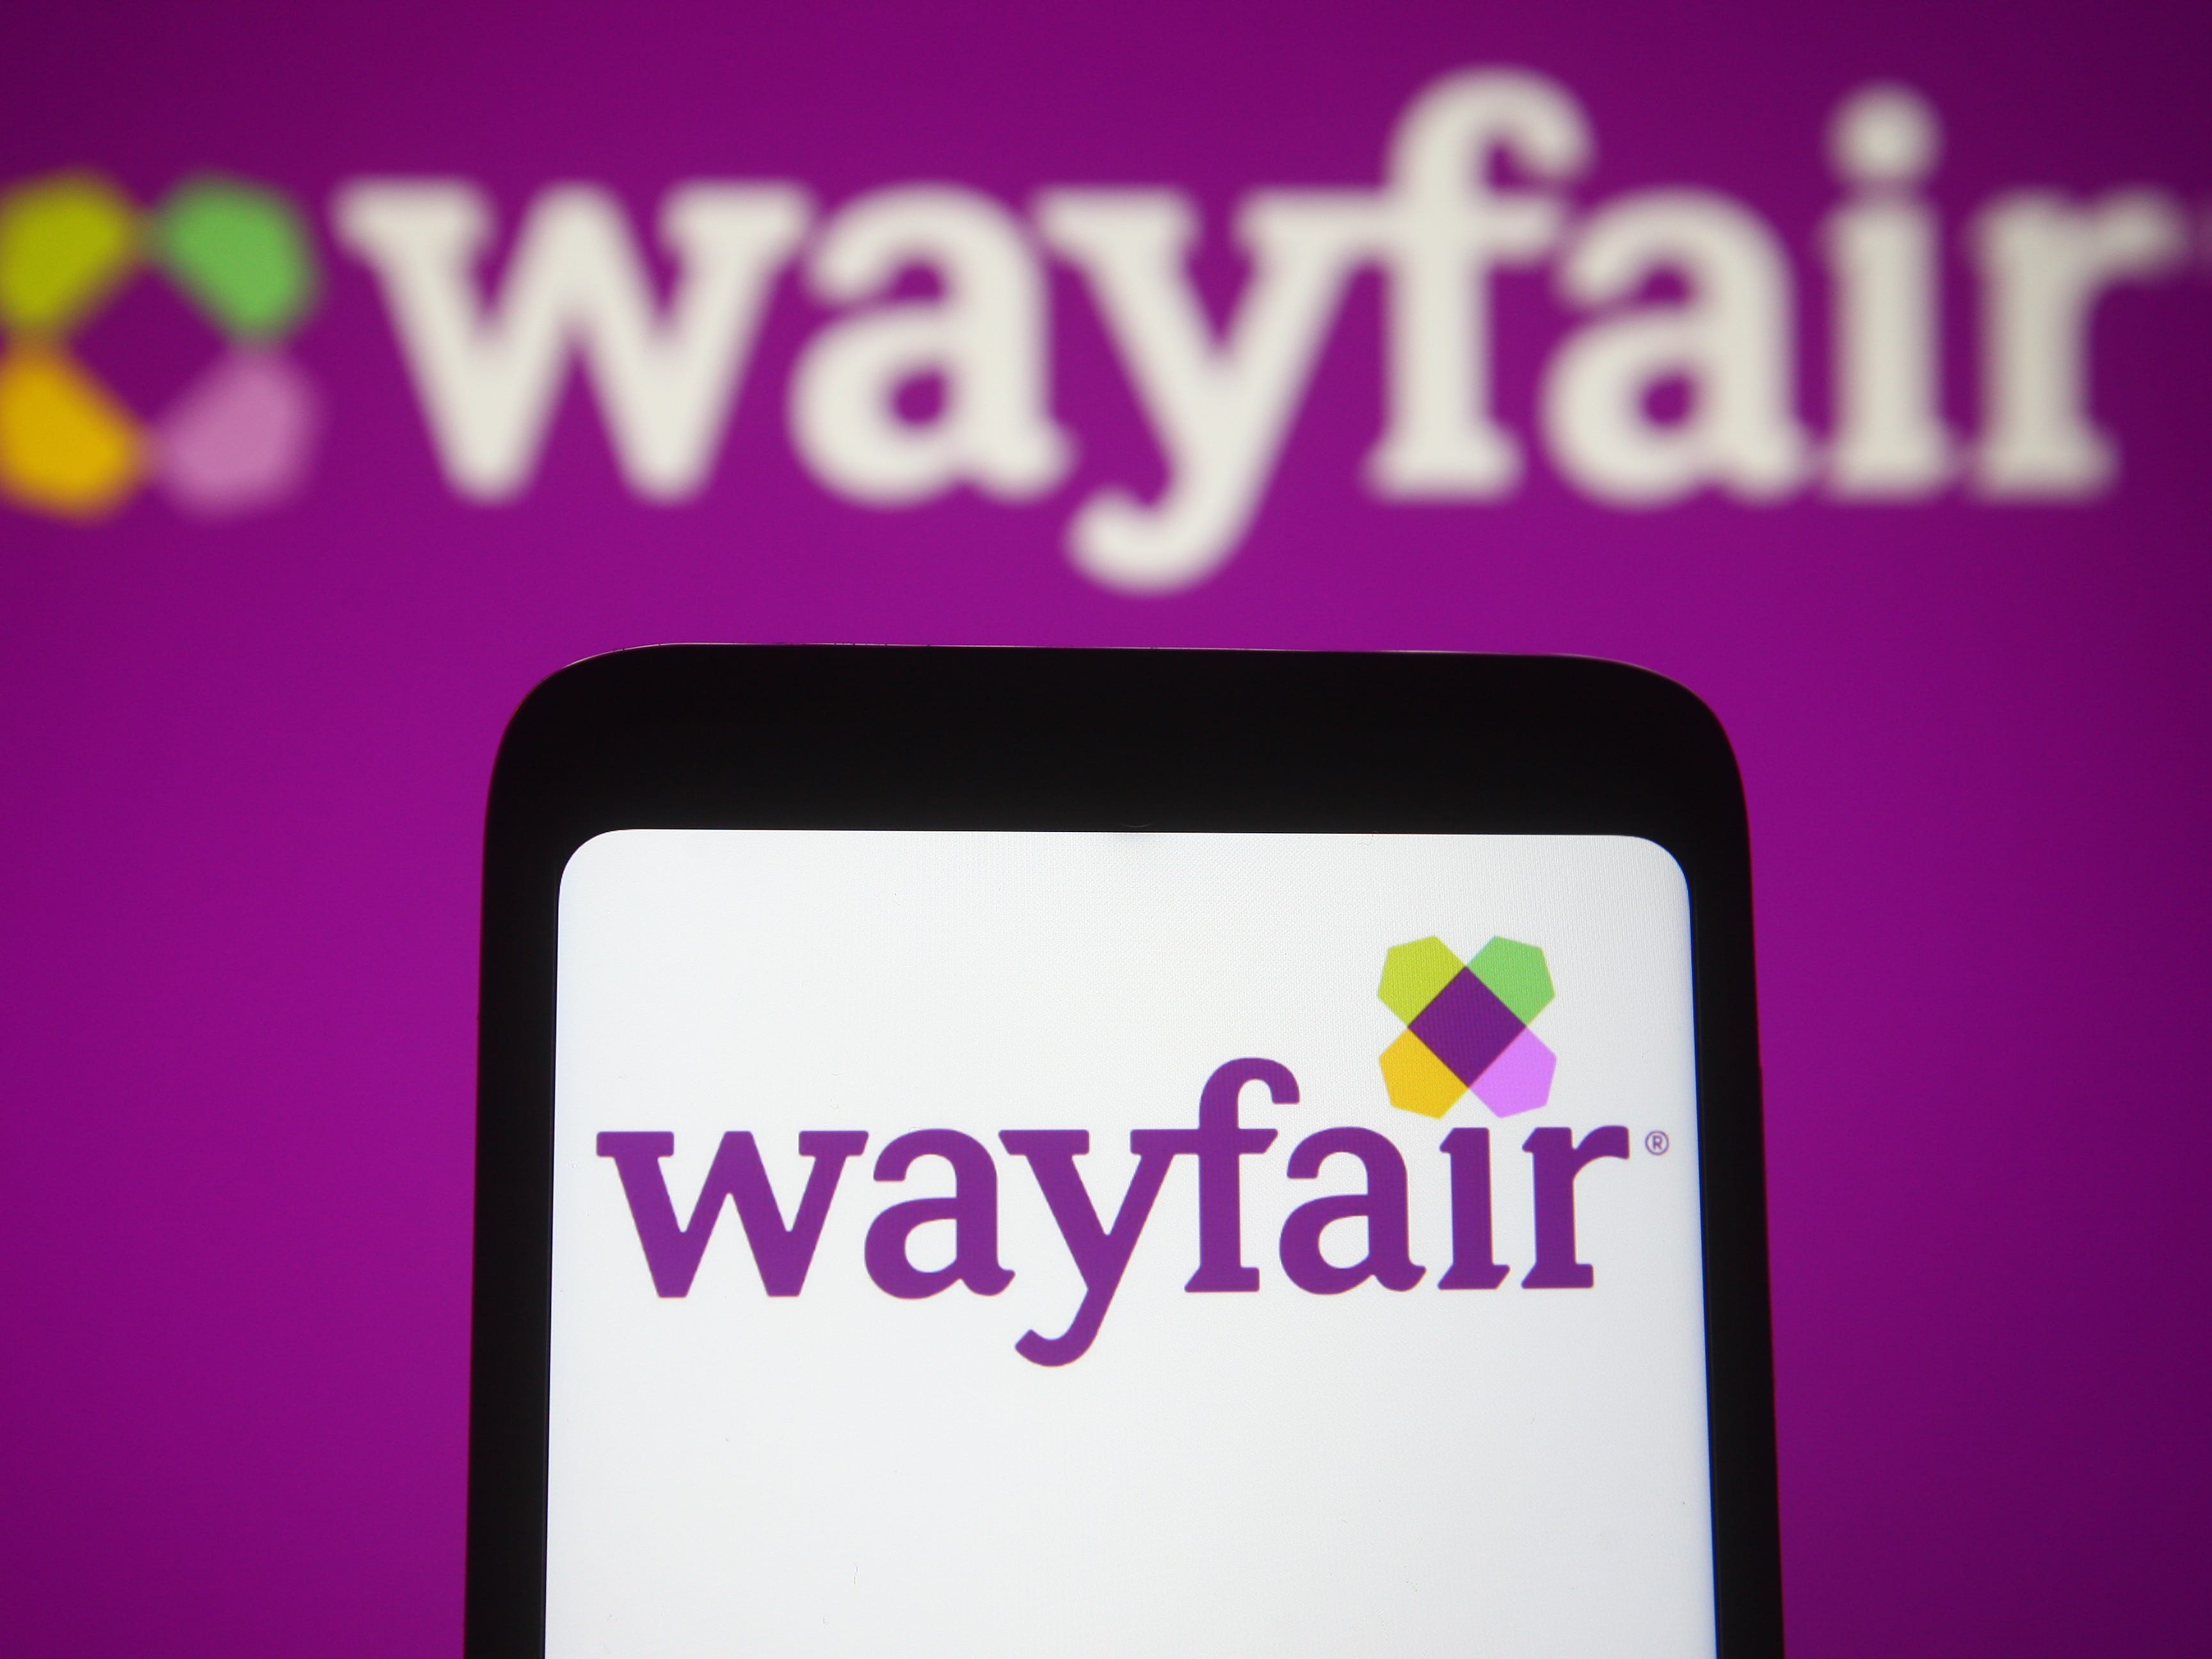 <p>Wayfair is expected to layoff more than 1,000 employees, about 5% of its workforce, in the coming weeks in response to slumping sales, <a href="https://www.wsj.com/articles/wayfair-is-preparing-to-lay-off-more-than-1-000-workers-11674161122?page=1" rel="noopener">the Wall Street Journal</a> reported on January 19.</p><p>The cuts mark the second round of layoffs in six months for the online furniture and home goods company, after it nixed 900 staffers in August 2022. </p><p>Though the company experienced significant growth during the a pandemic-driven home improvement boom, sales began to stagnate as social distancing policies loosened and Americans began returning to offices.</p><p>"We were seeing the tailwinds of the pandemic accelerate the adoption of e-commerce shopping, and I personally pushed hard to hire a strong team to support that growth. This year, that growth has not materialized as we had anticipated," Wayfair CEO Shah wrote in a letter to employees announcing the August 2022 layoffs, <a href="https://www.cnn.com/2022/08/19/business/wayfair-layoffs/index.html" rel="noopener">per CNN.</a> </p><p>In its most recent quarter, the <a href="https://investor.wayfair.com/reporting/quarterly-results/default.aspx" rel="noopener">Wayfair reported</a> that net revenue decreased by $281 million, down 9% from the same period the year prior. </p>